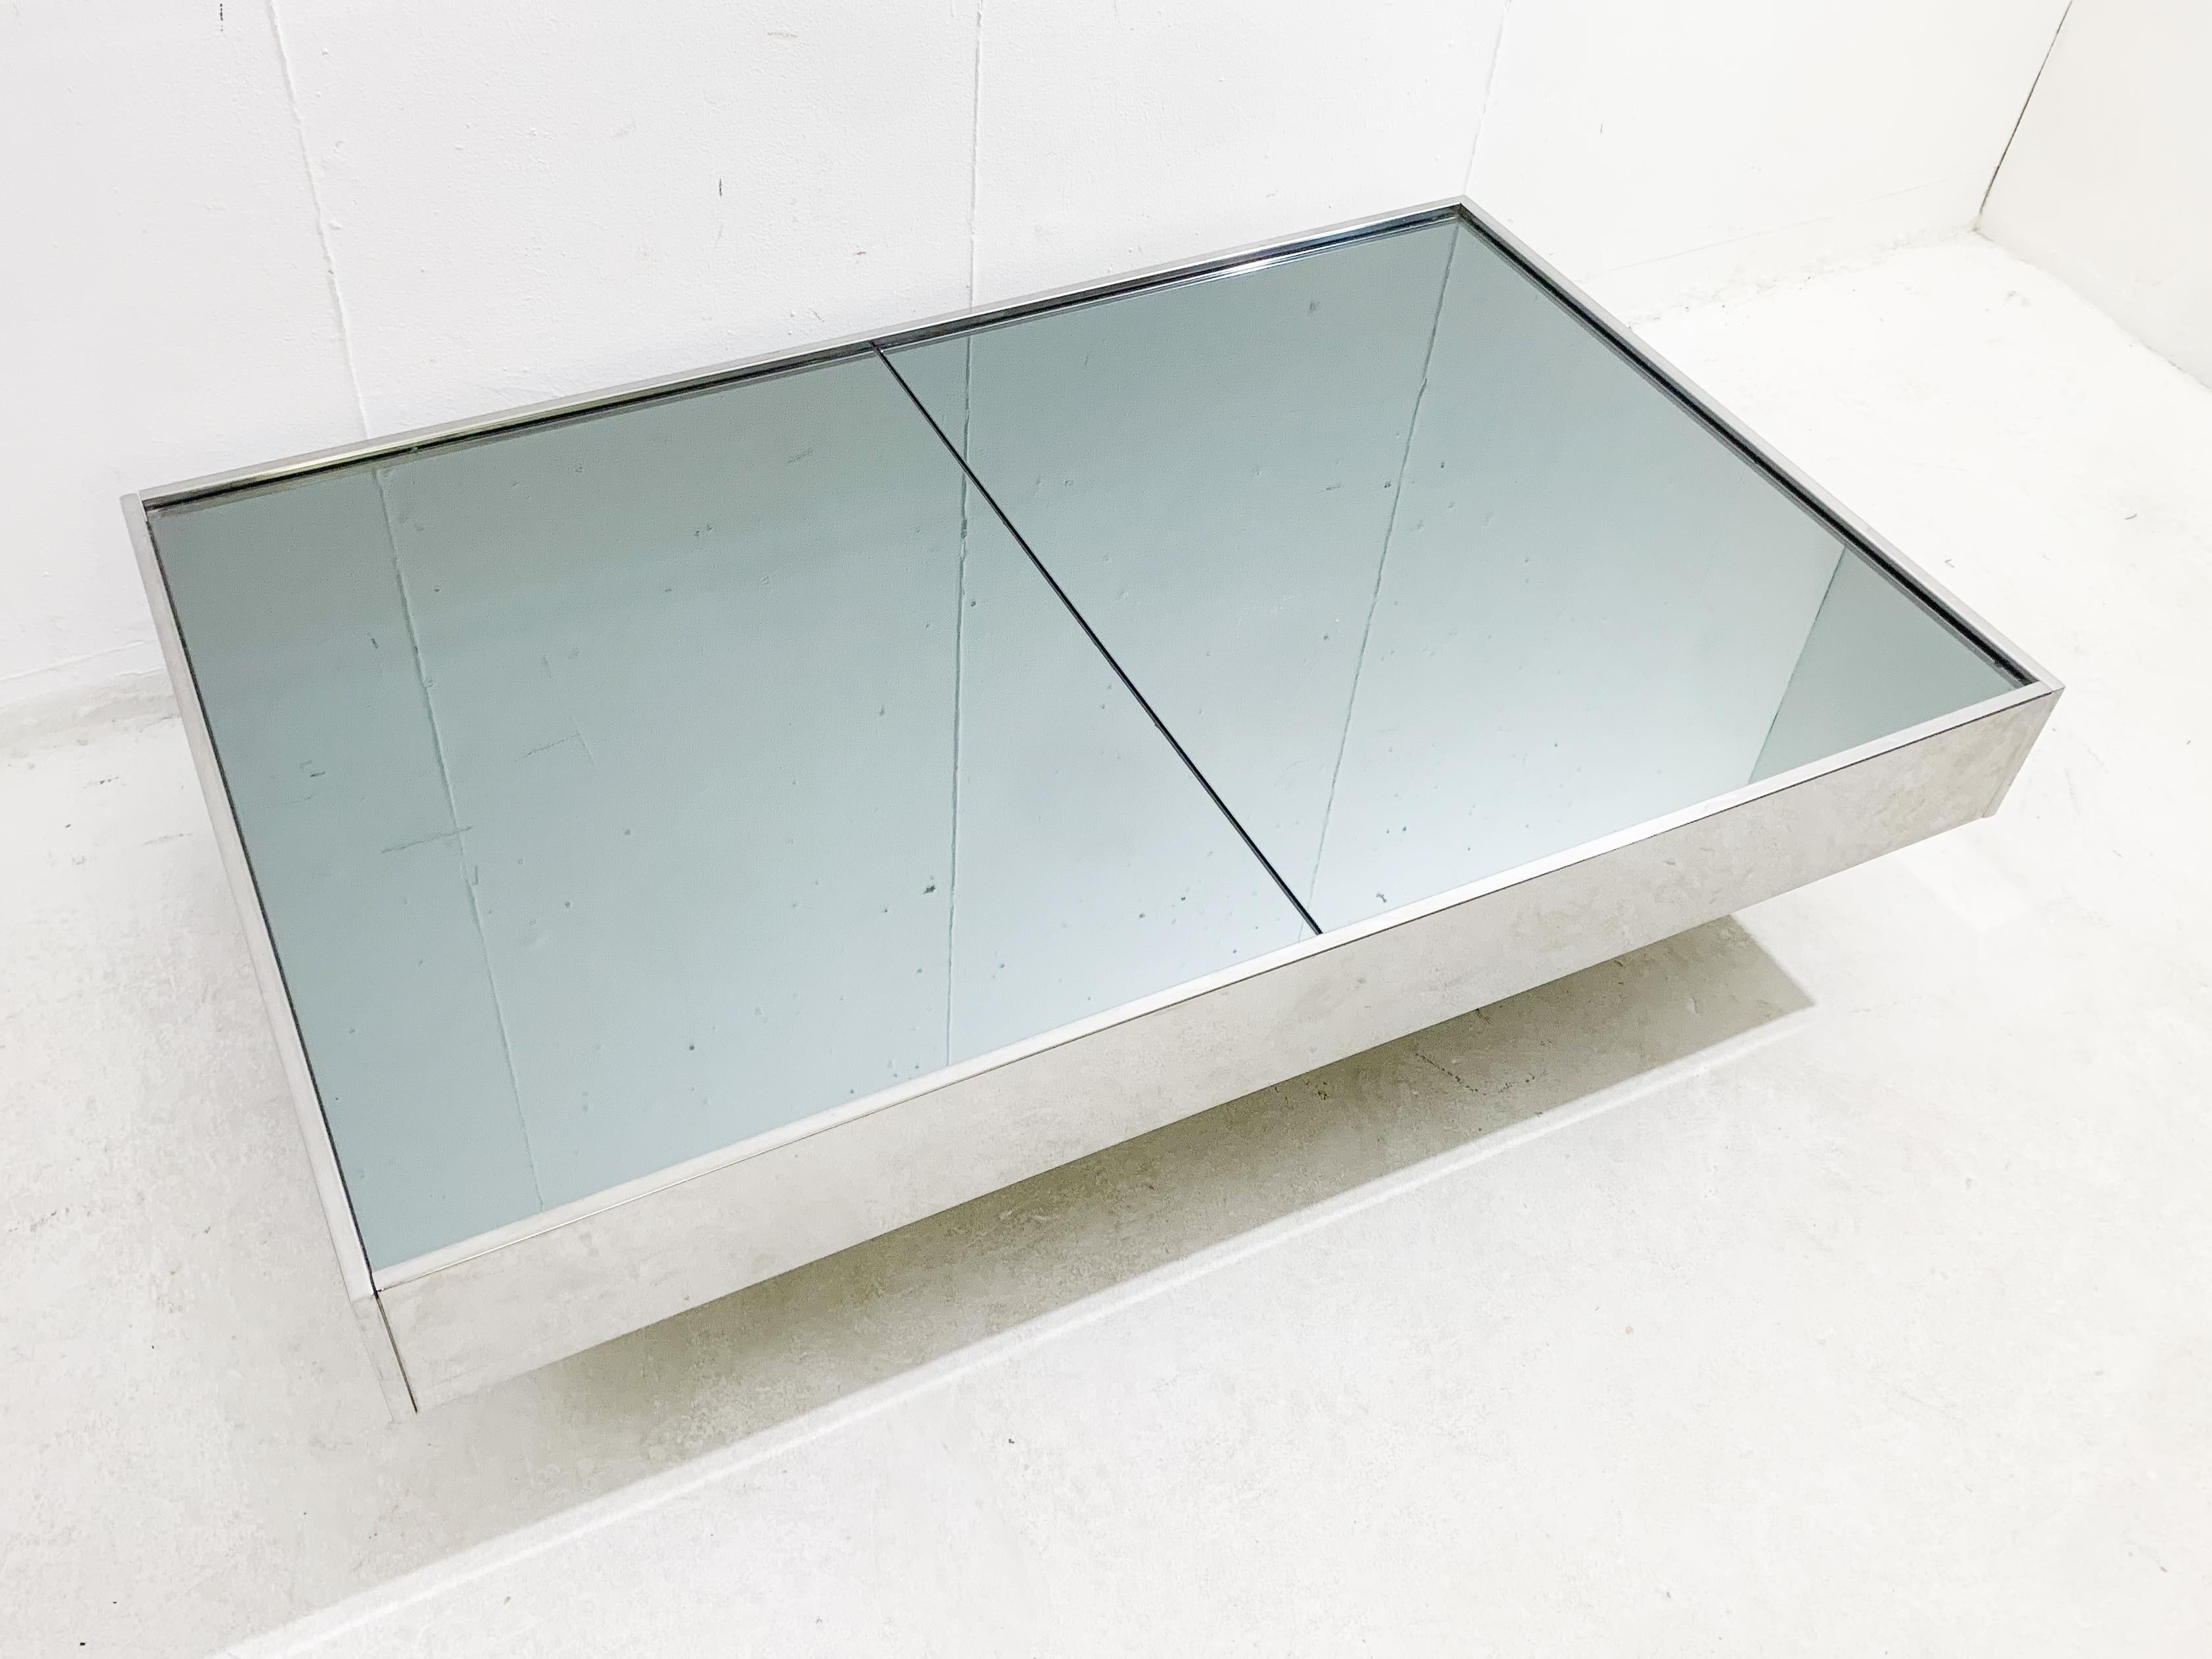 Late 20th Century Mid-century chrome and mirror sliding bar coffee table by Willy Rizzo - Italy